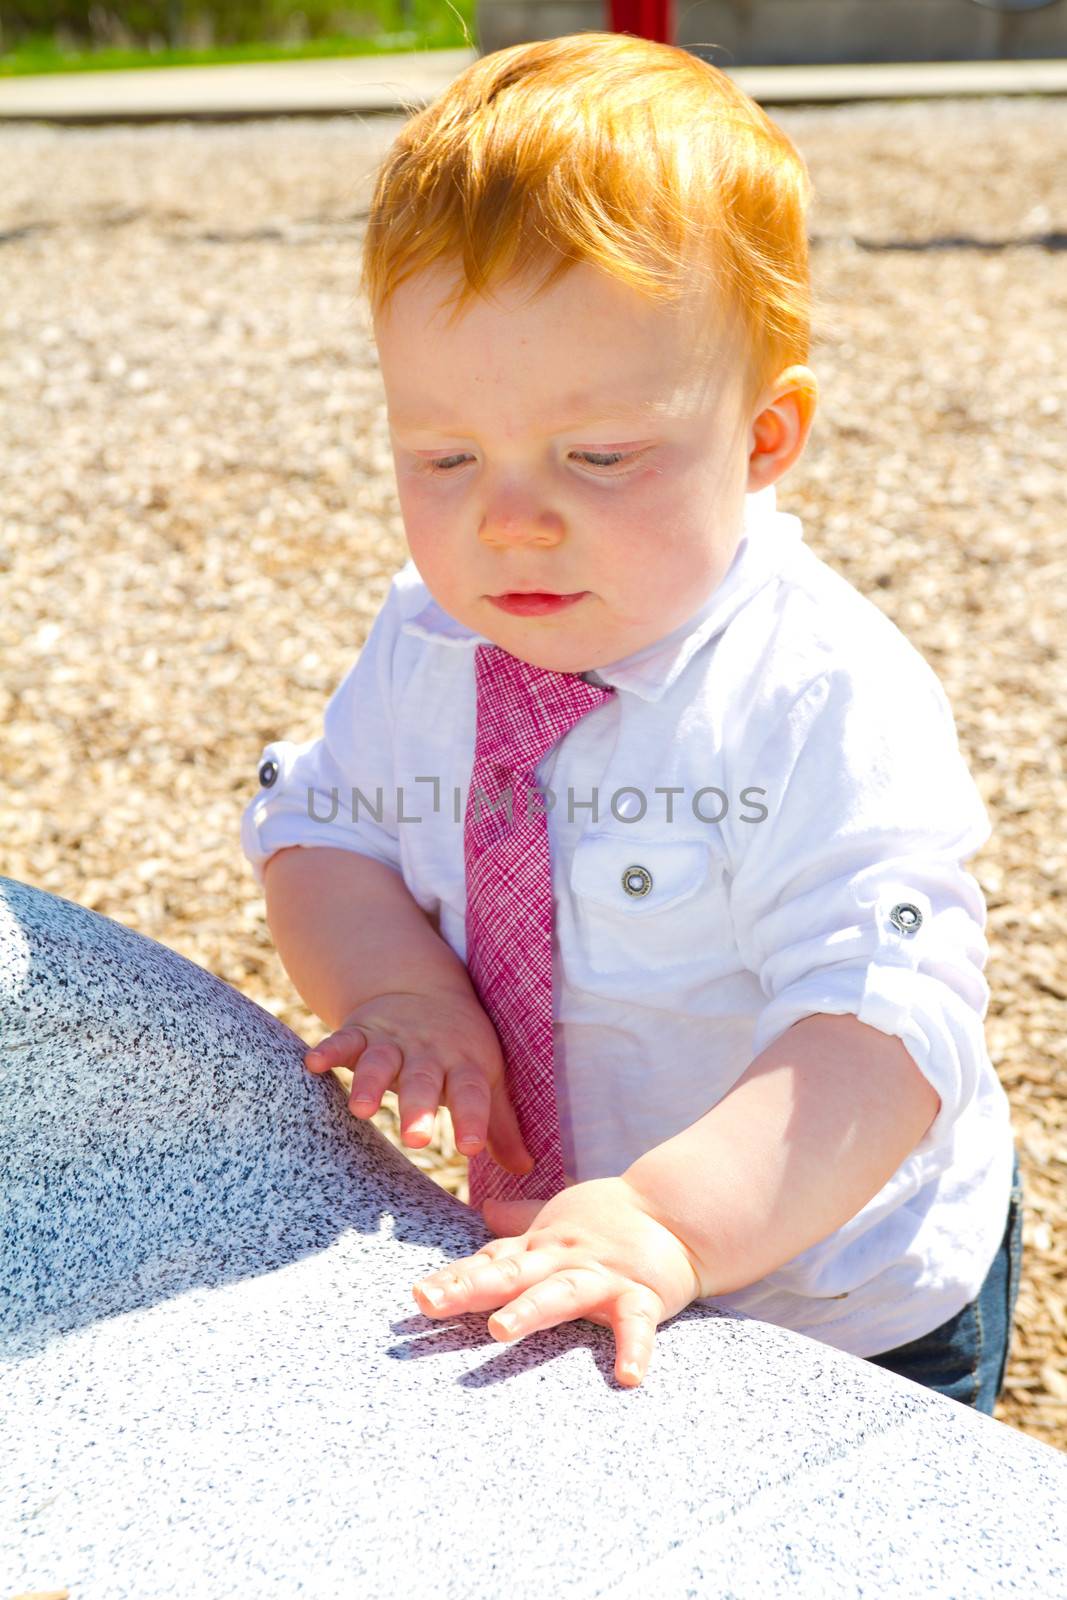 A caucasian baby boy plays at the park wearing a white shirt and a tie.